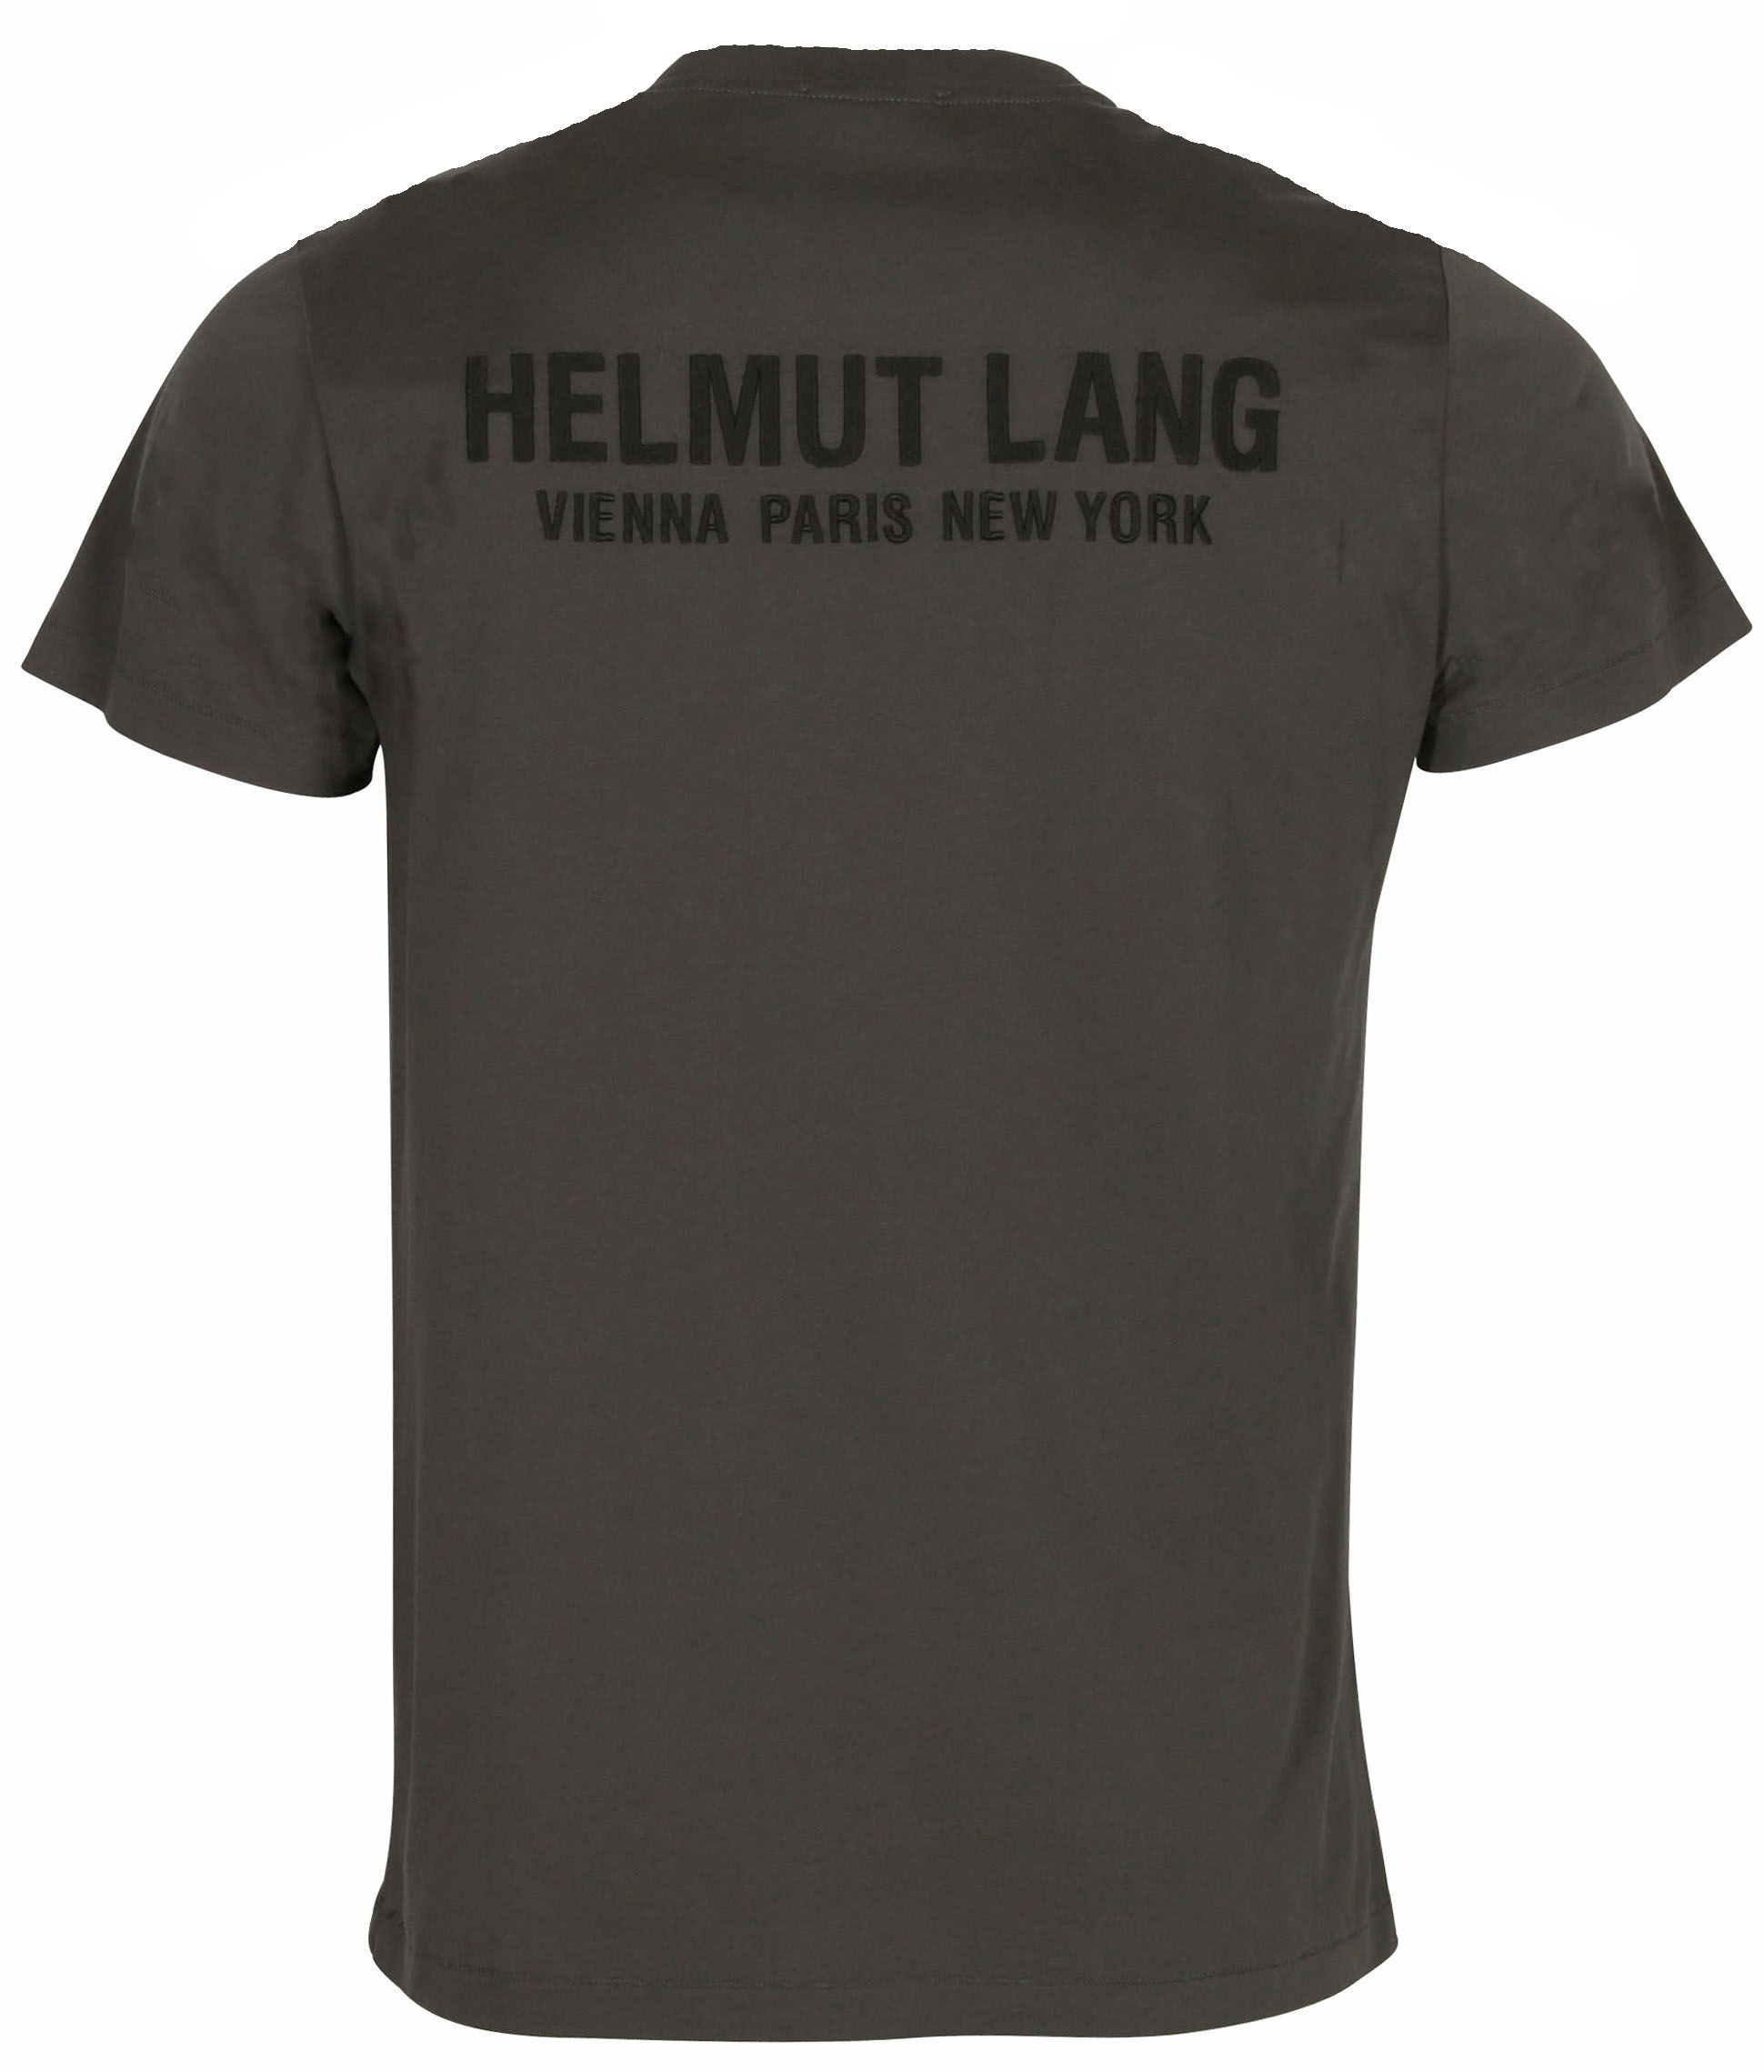 Helmut Lang T-Shirt Grey Printed Embroidered XL